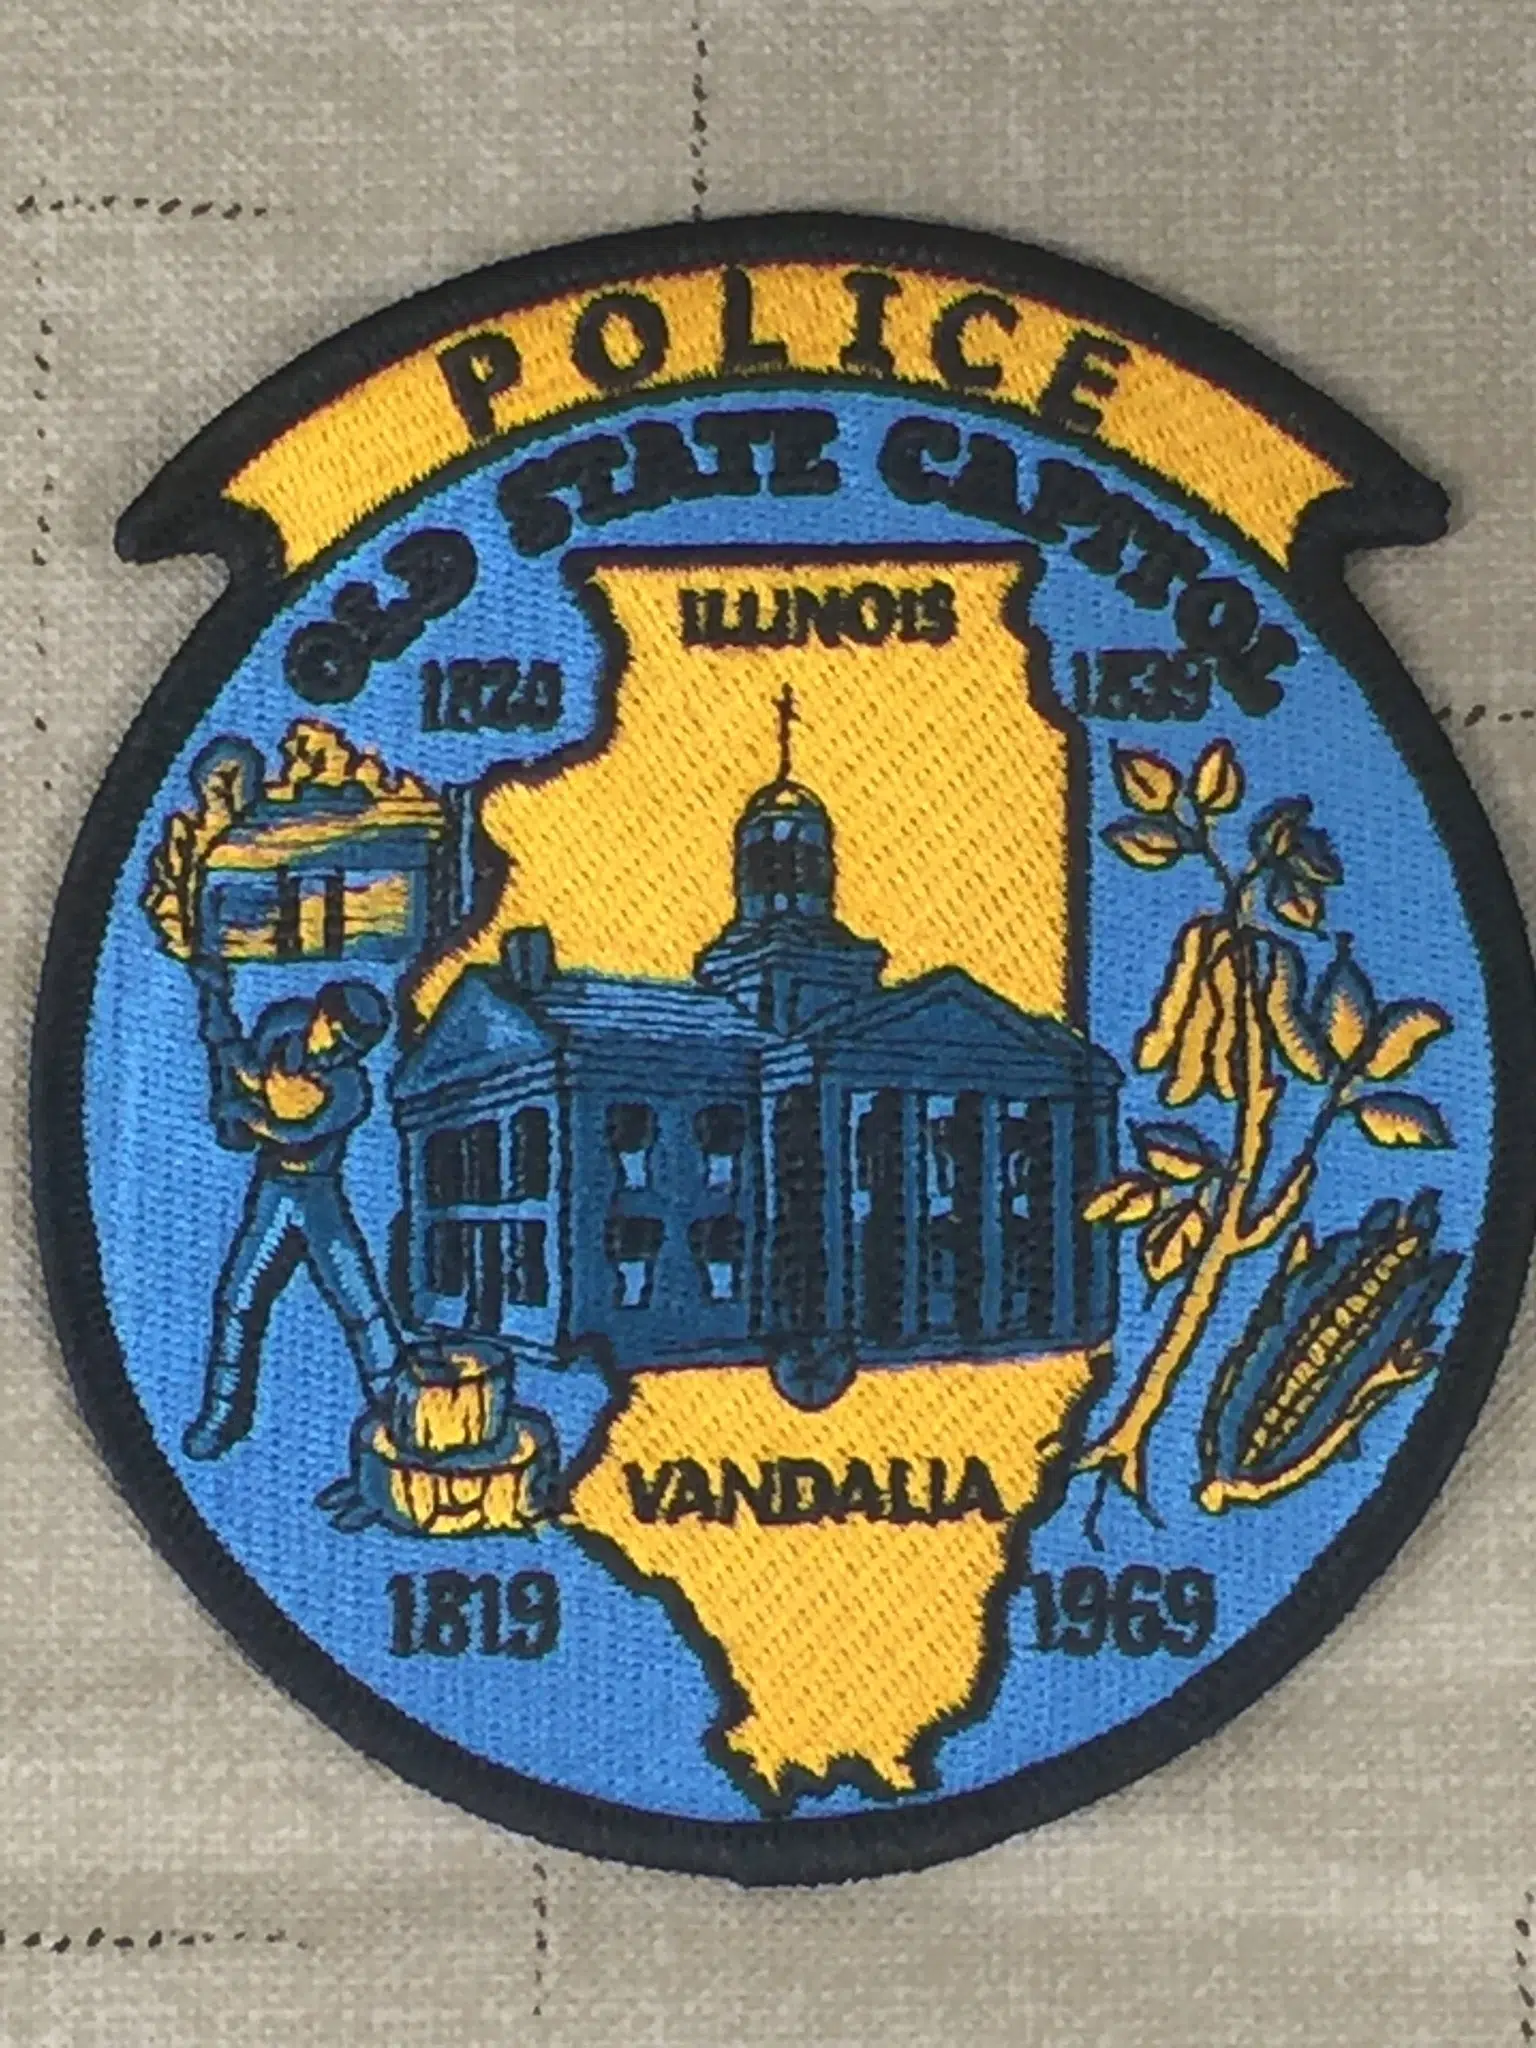 Vandalia PD alerting the public about IRS Scam 